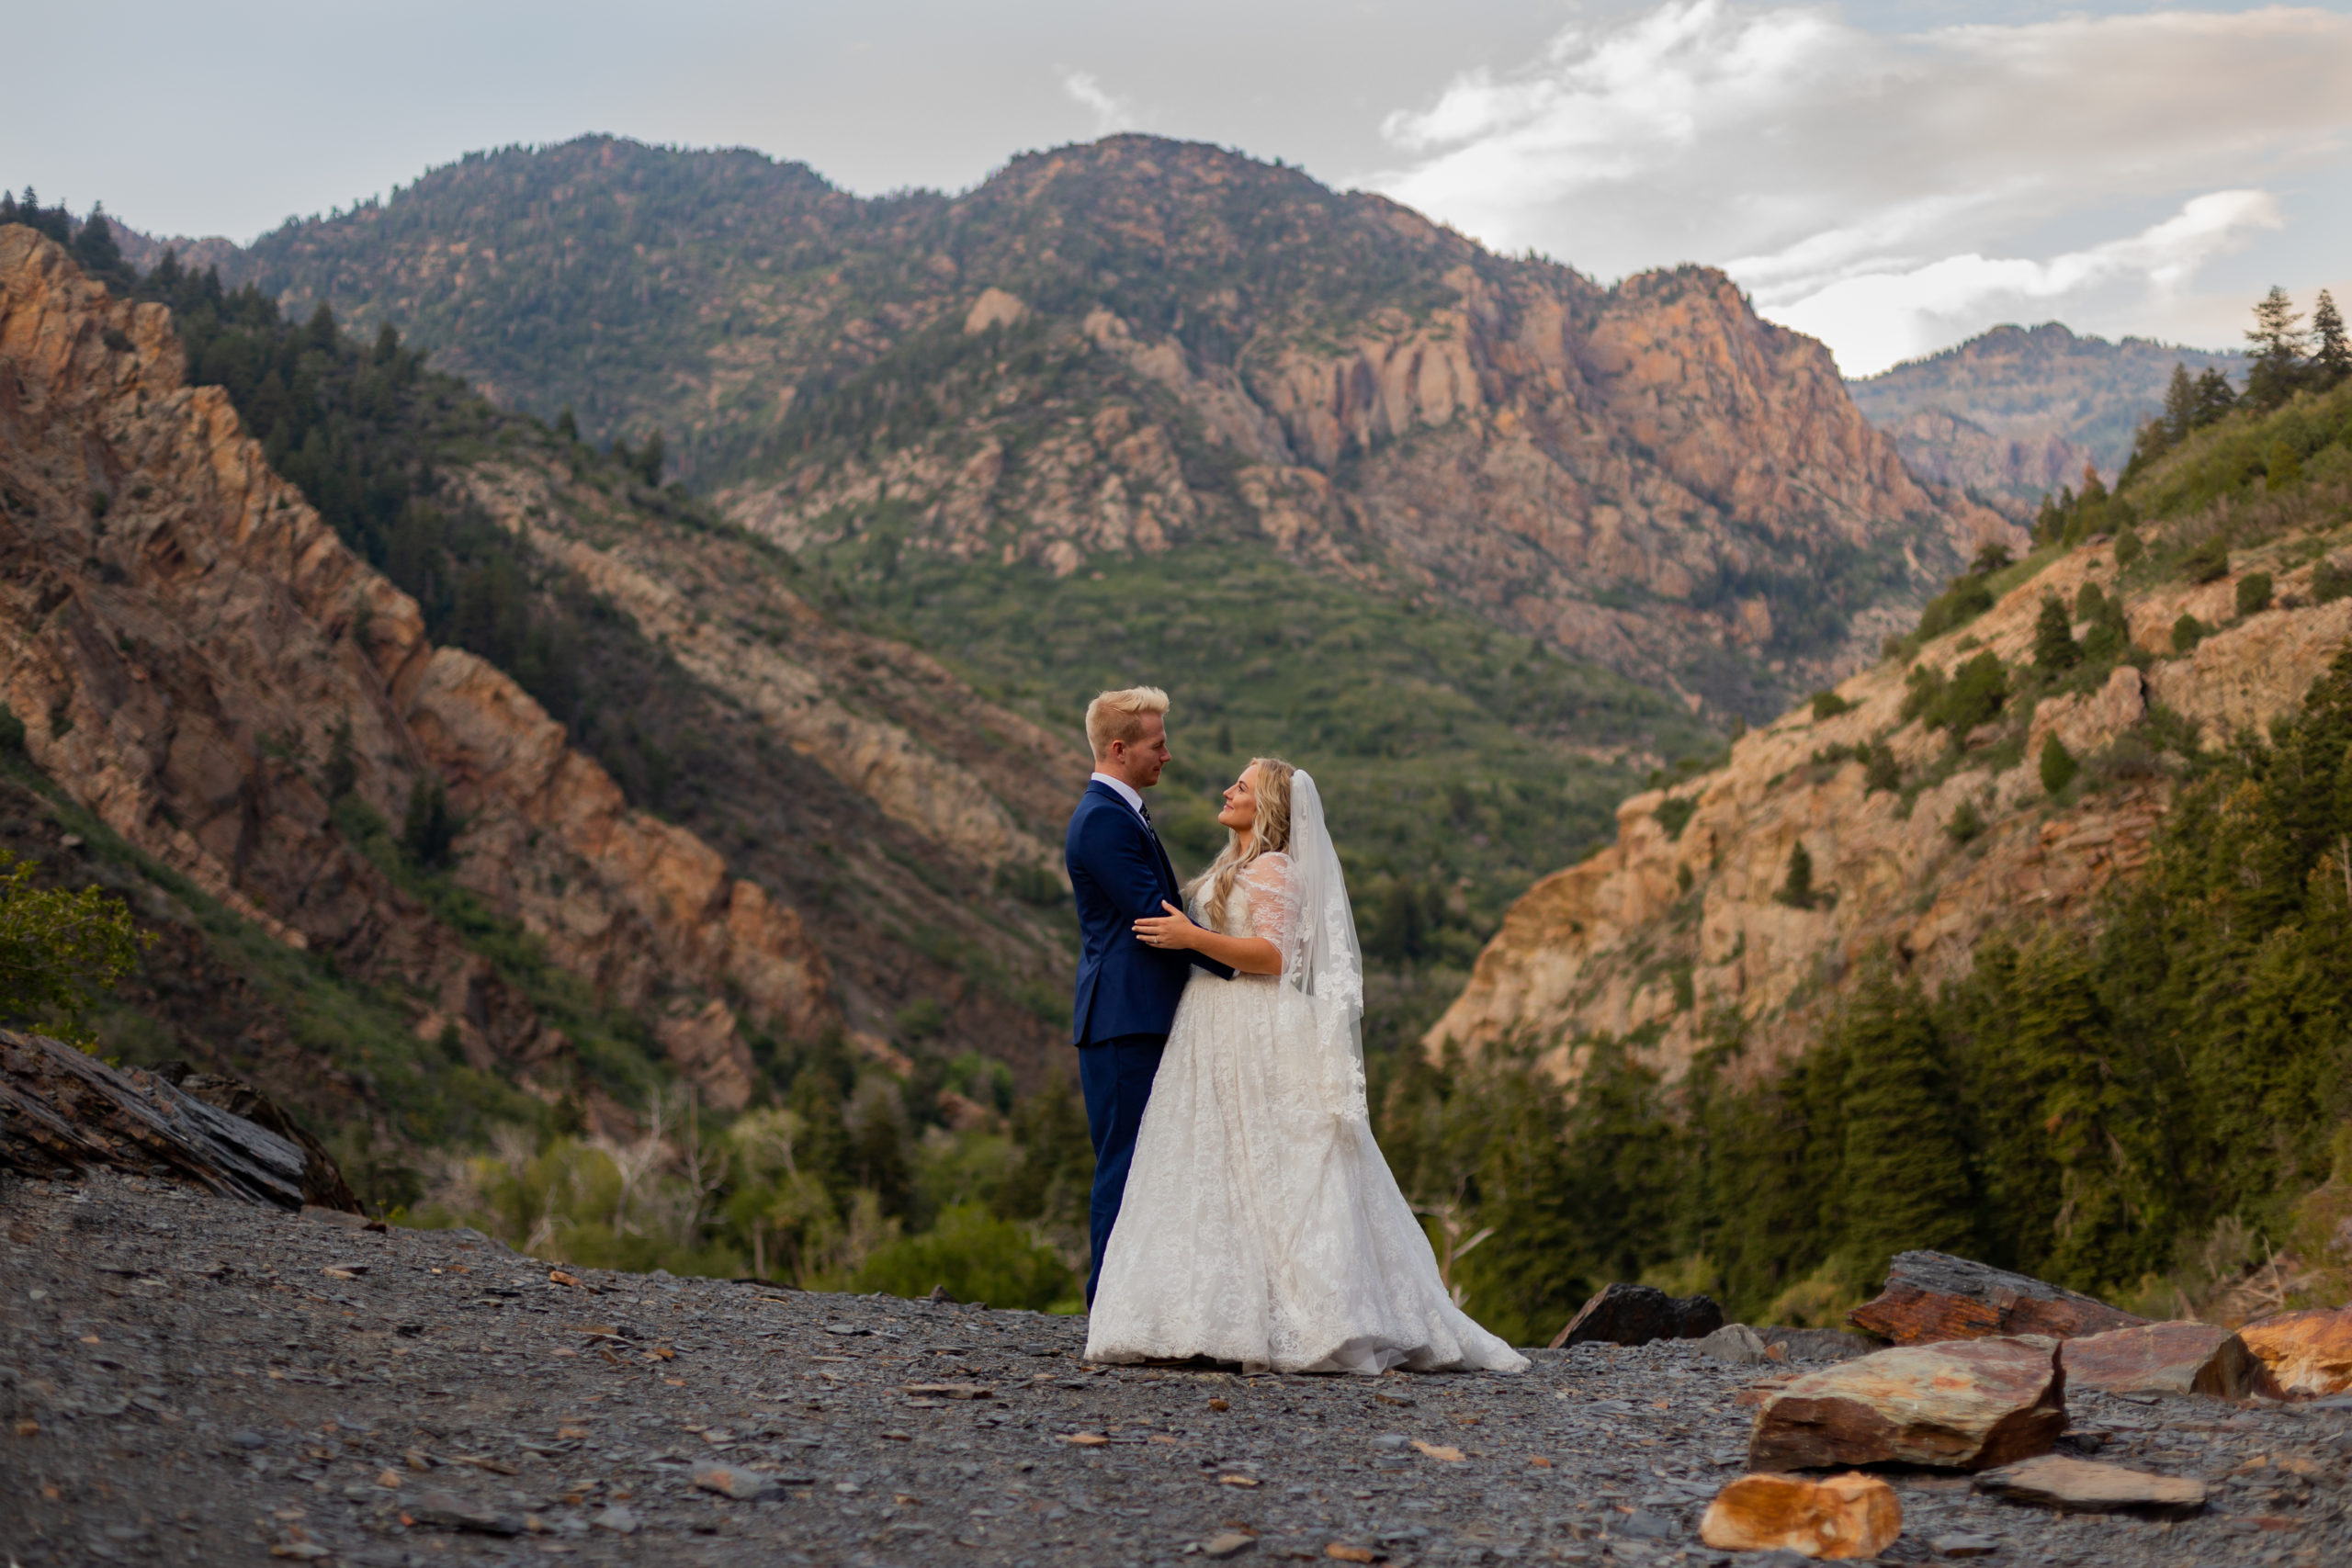 How to plan an elopement. Couple with mountain backdrop